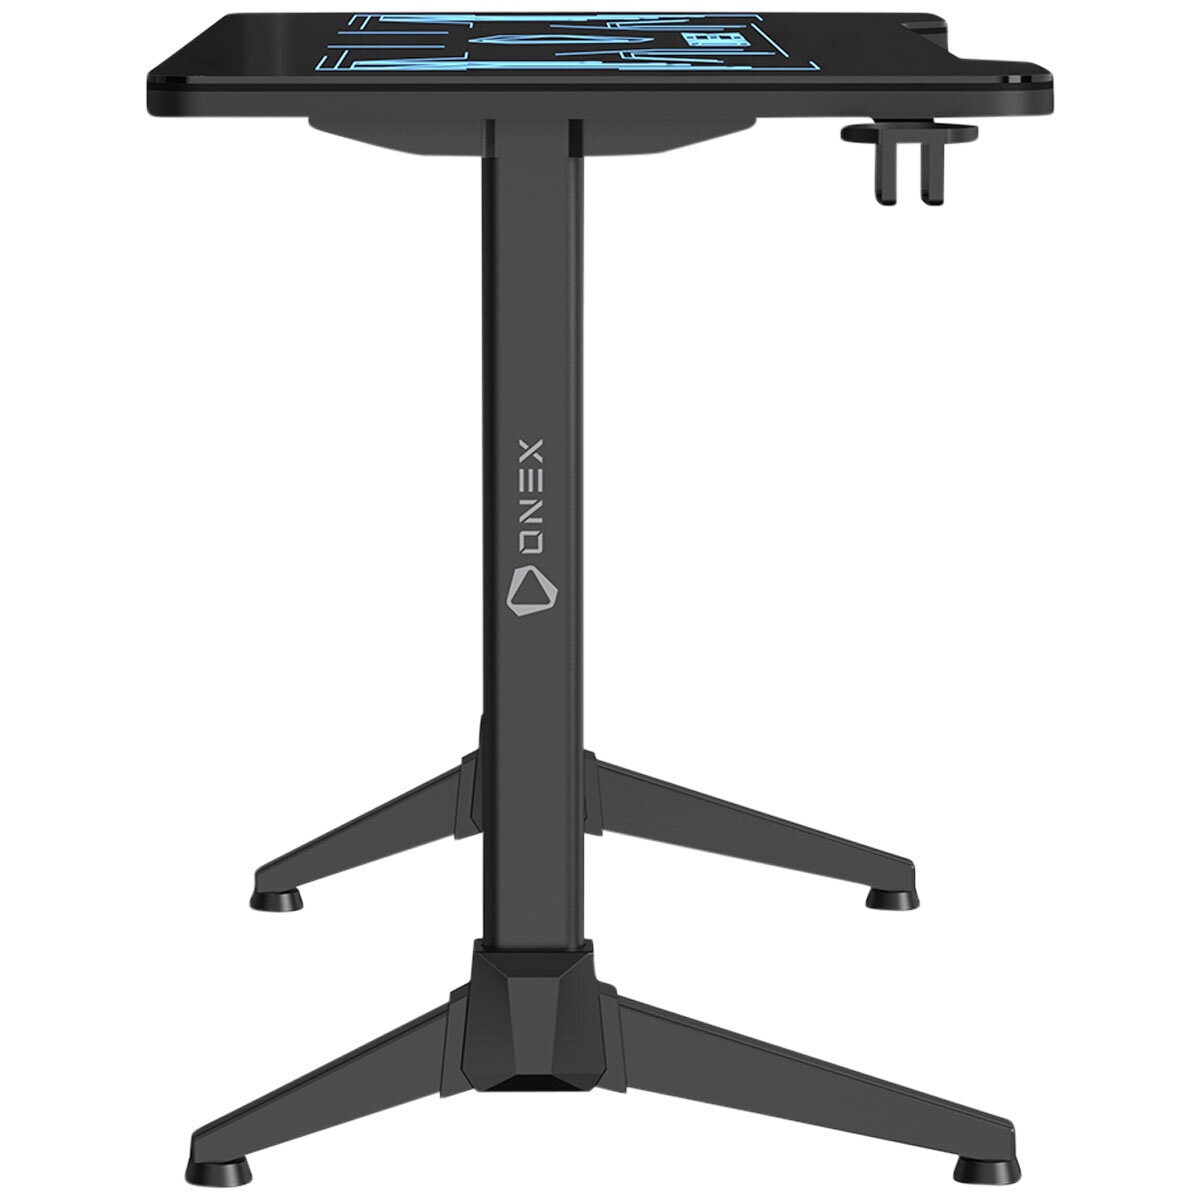 ONEX GD1200G Tempered Glass RGB Gaming Desk with Cup holder Black & Blue